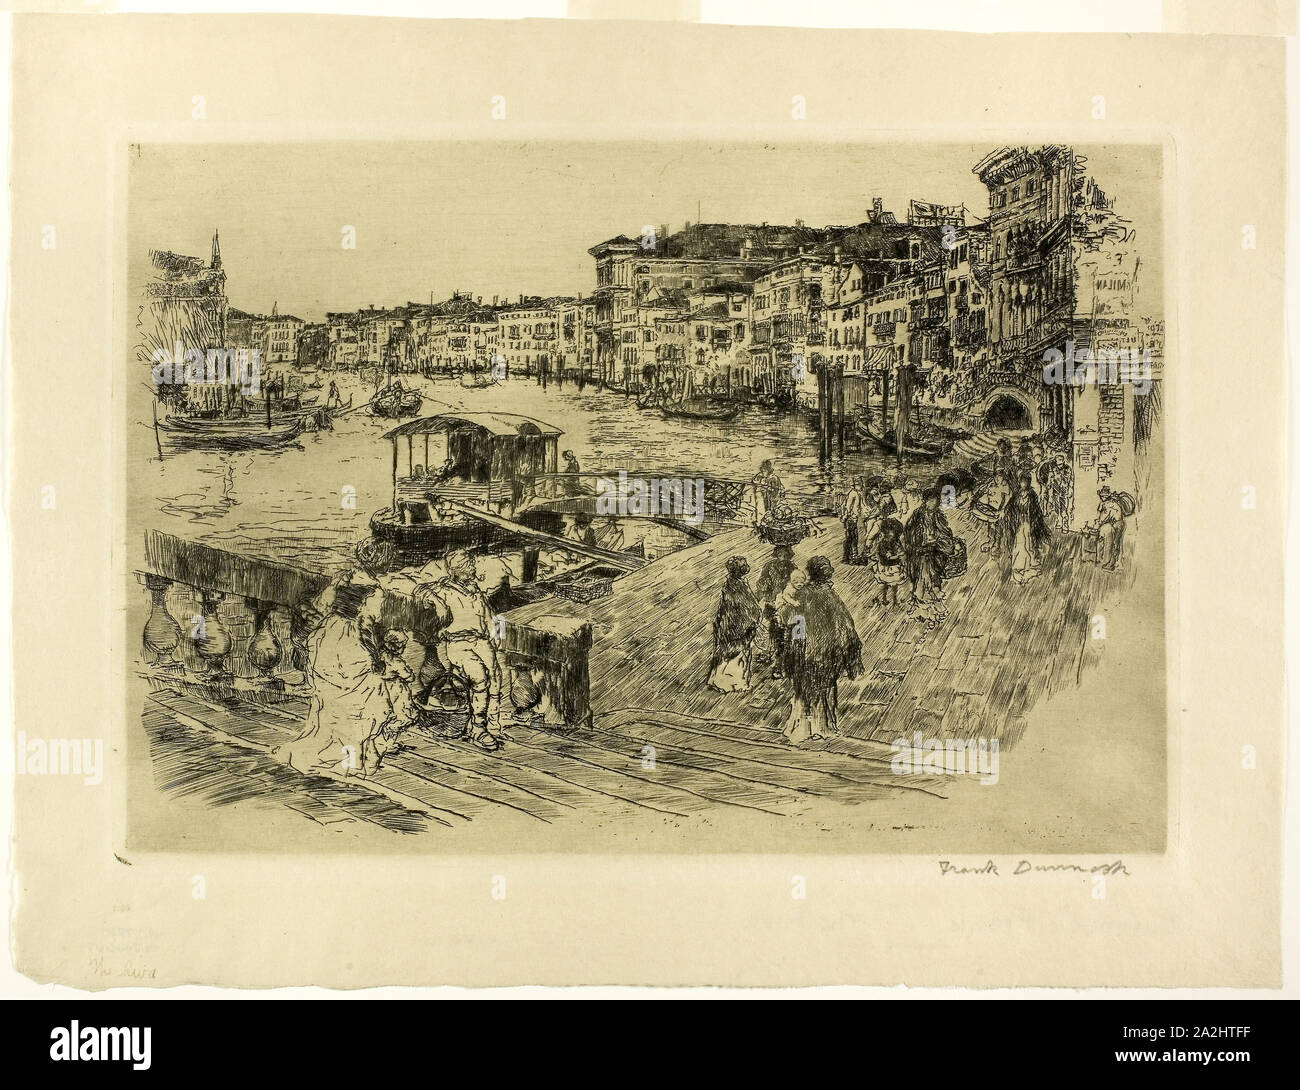 View of the Grand Canal, 1883, Frank Duveneck, American, 1848-1919, United States, Etching with drypoint on cream wove paper, 267 x 391 mm (image), 277 x 402 mm (plate), 368 x 482 mm (sheet Stock Photo